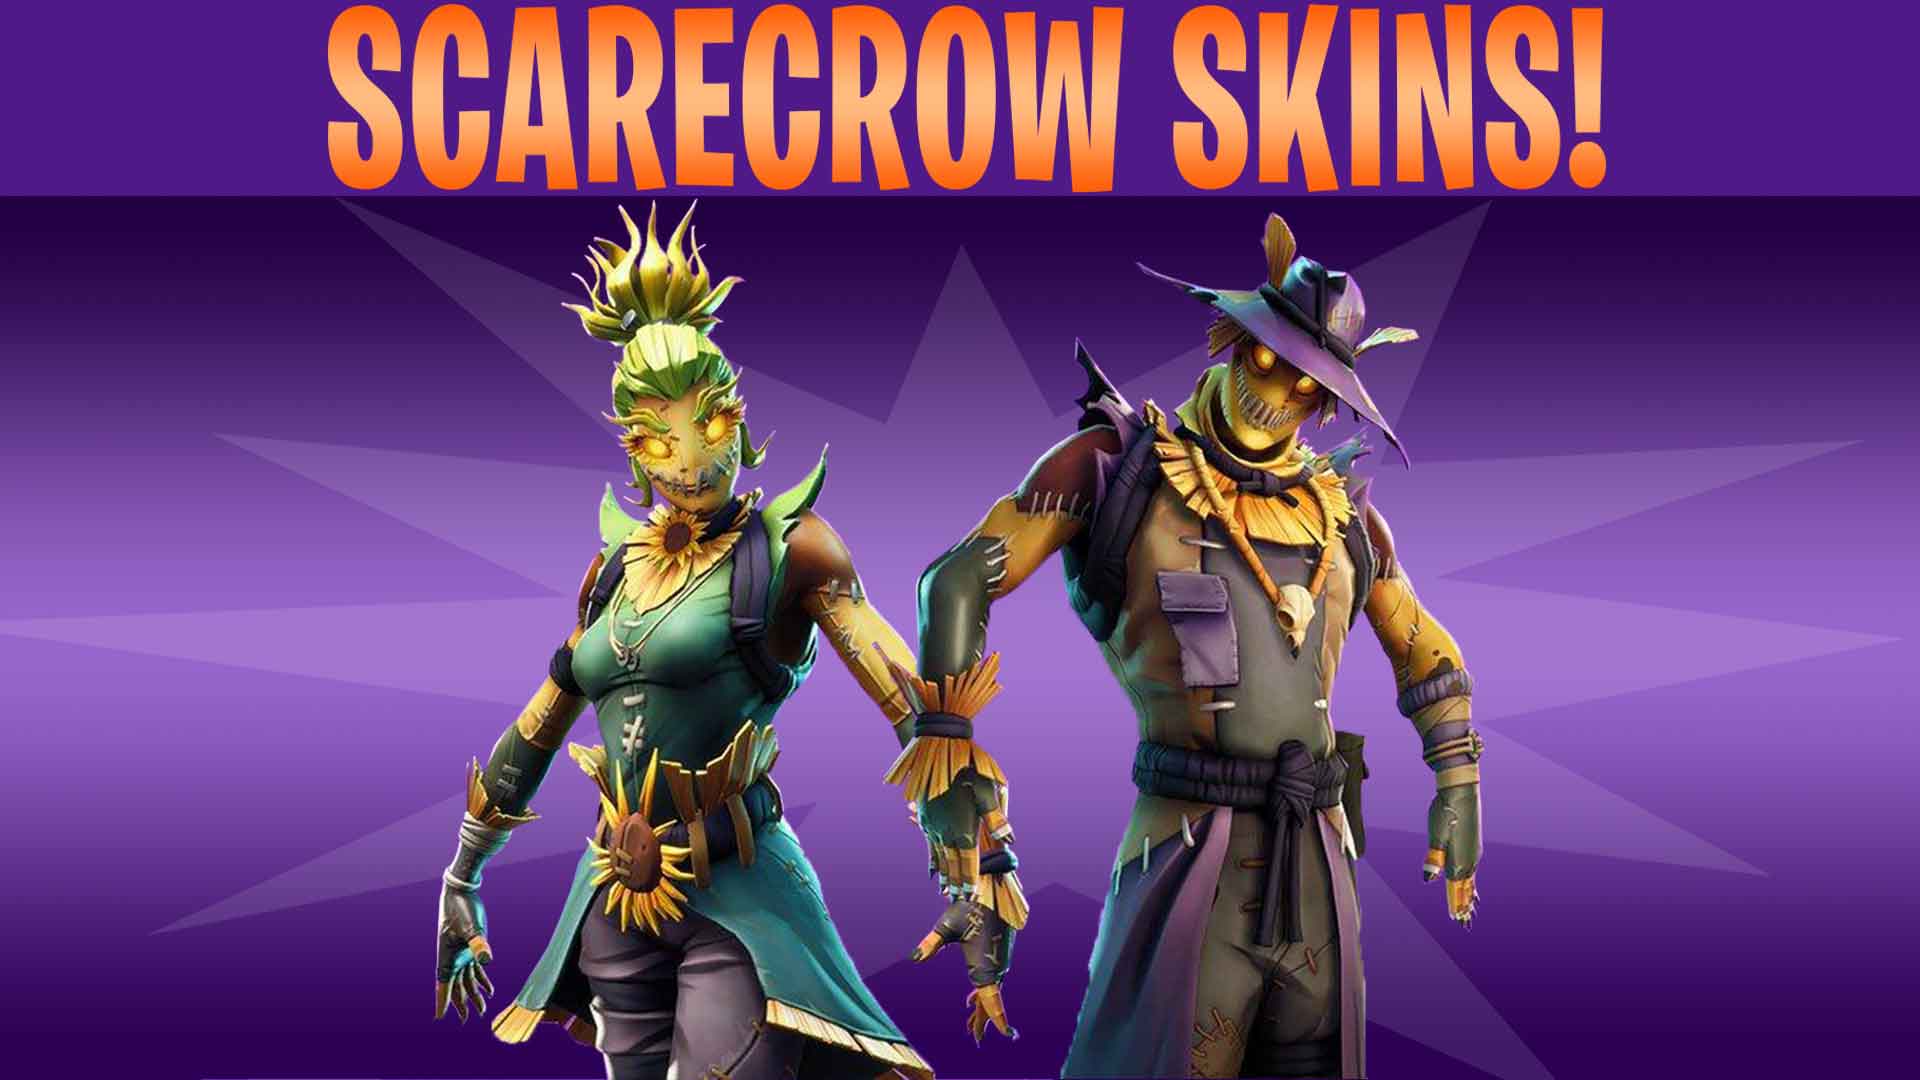 First Halloween skins arrive, gliders and more! News, Skins, Settings, Updates